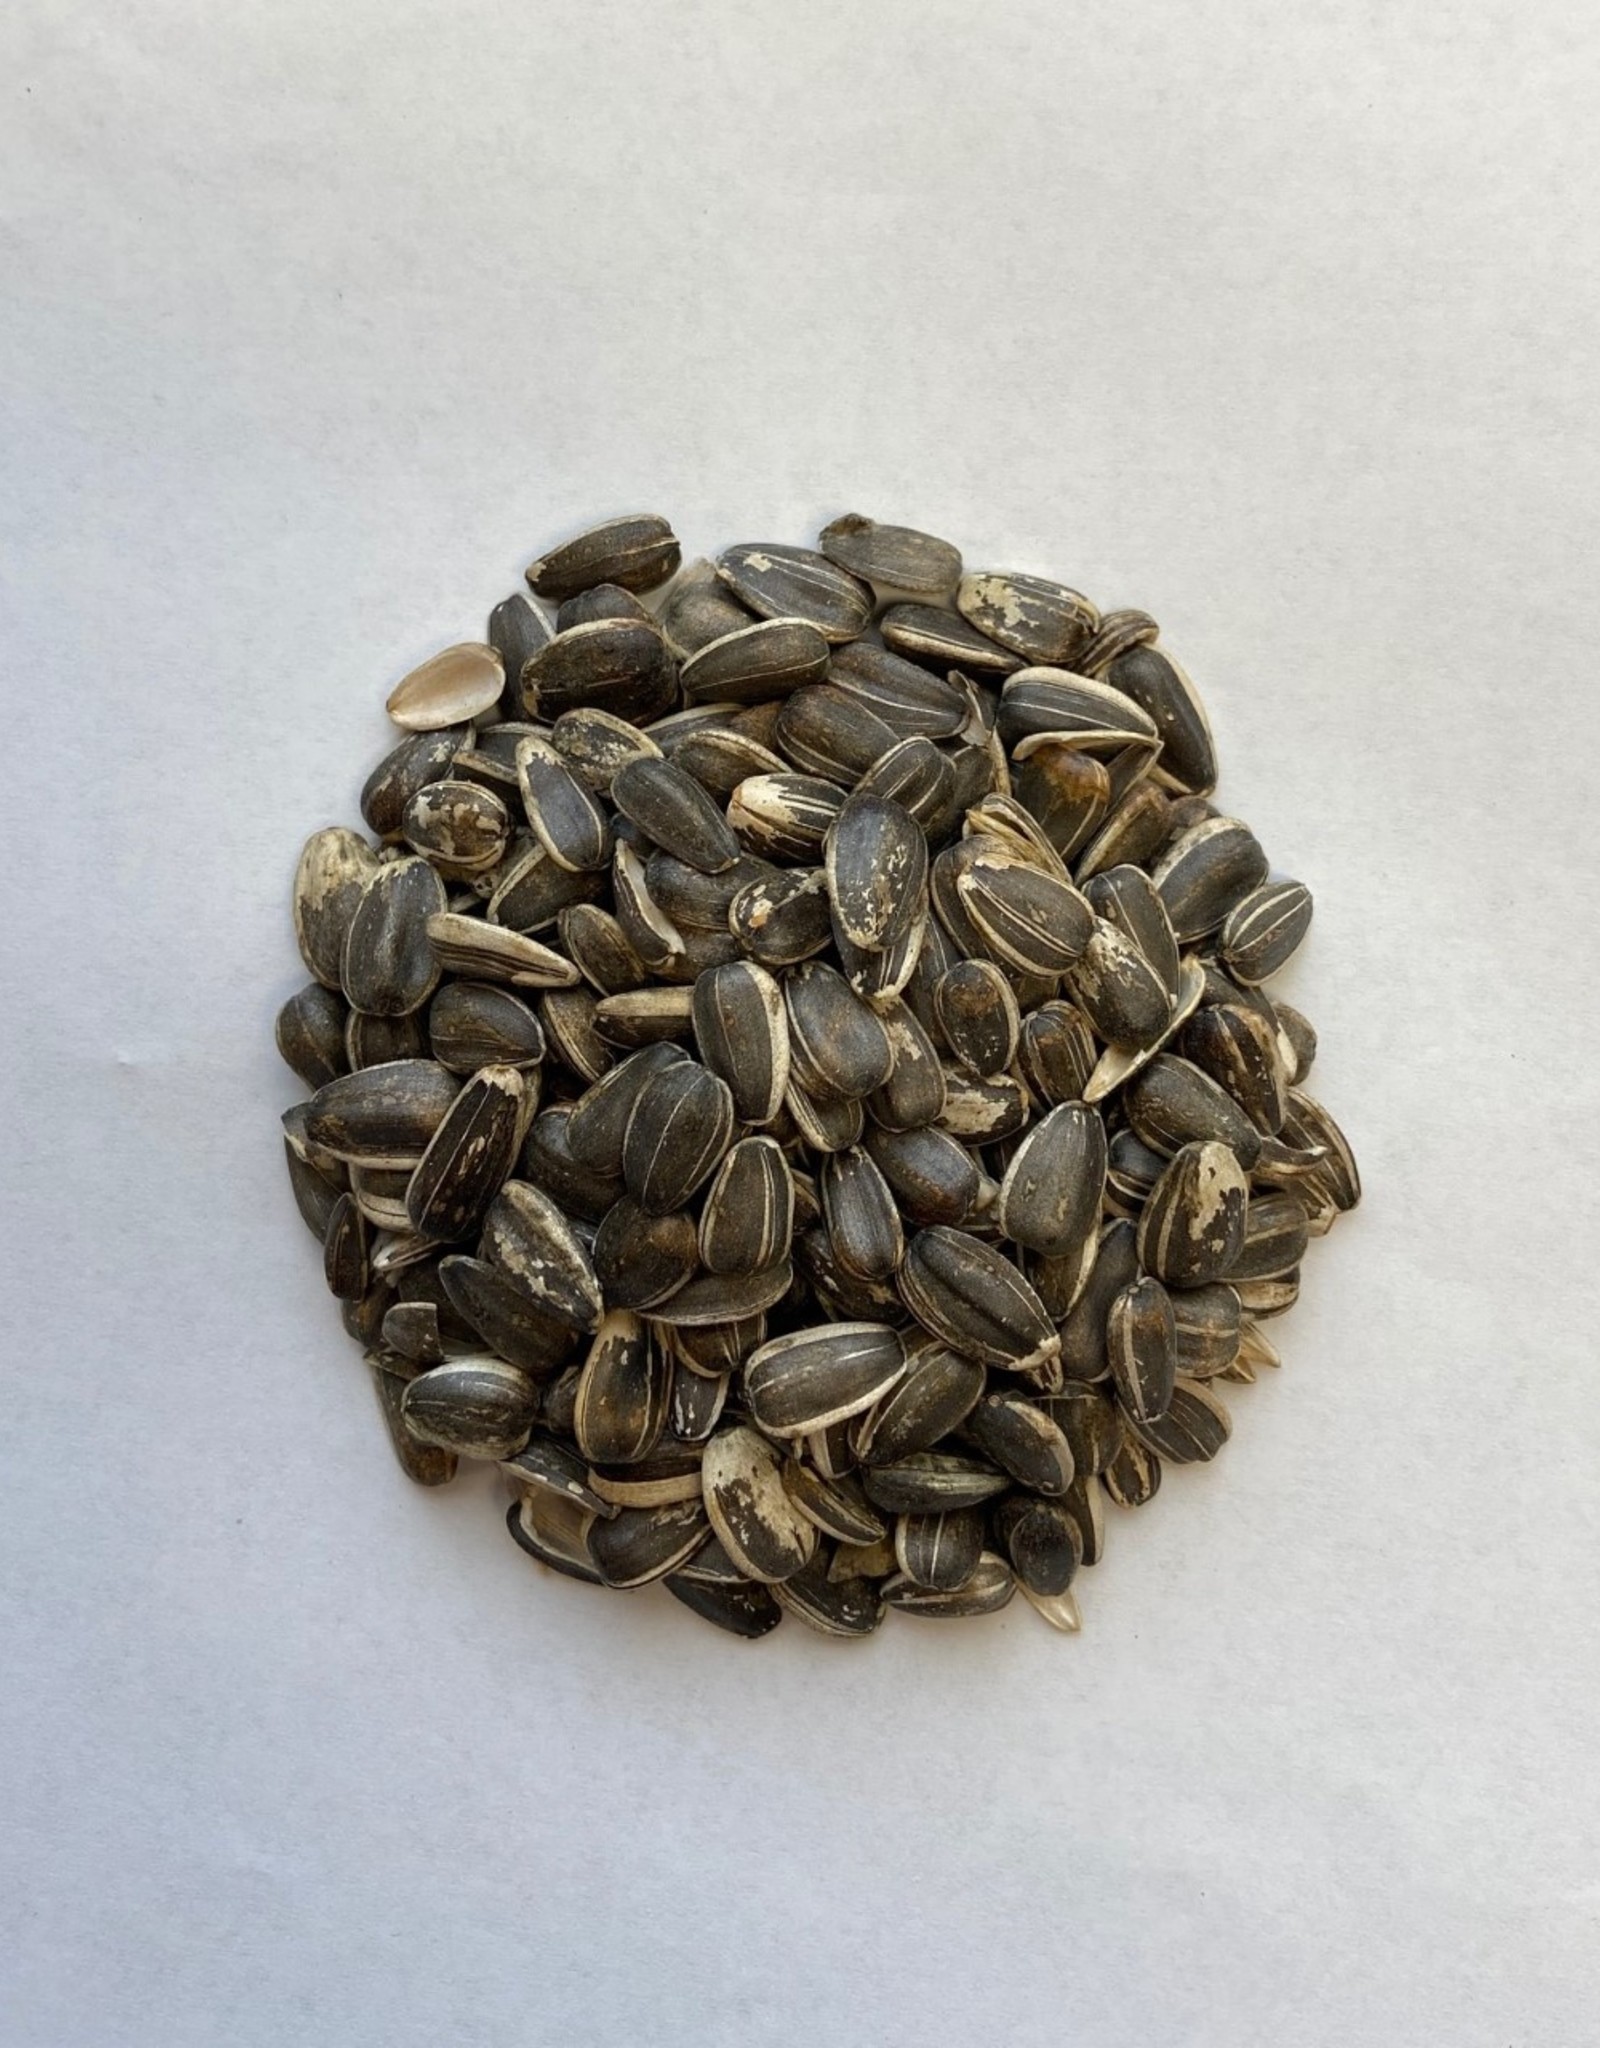 UNBRANDED STRIPED SUNFLOWER SEED 6 LBS